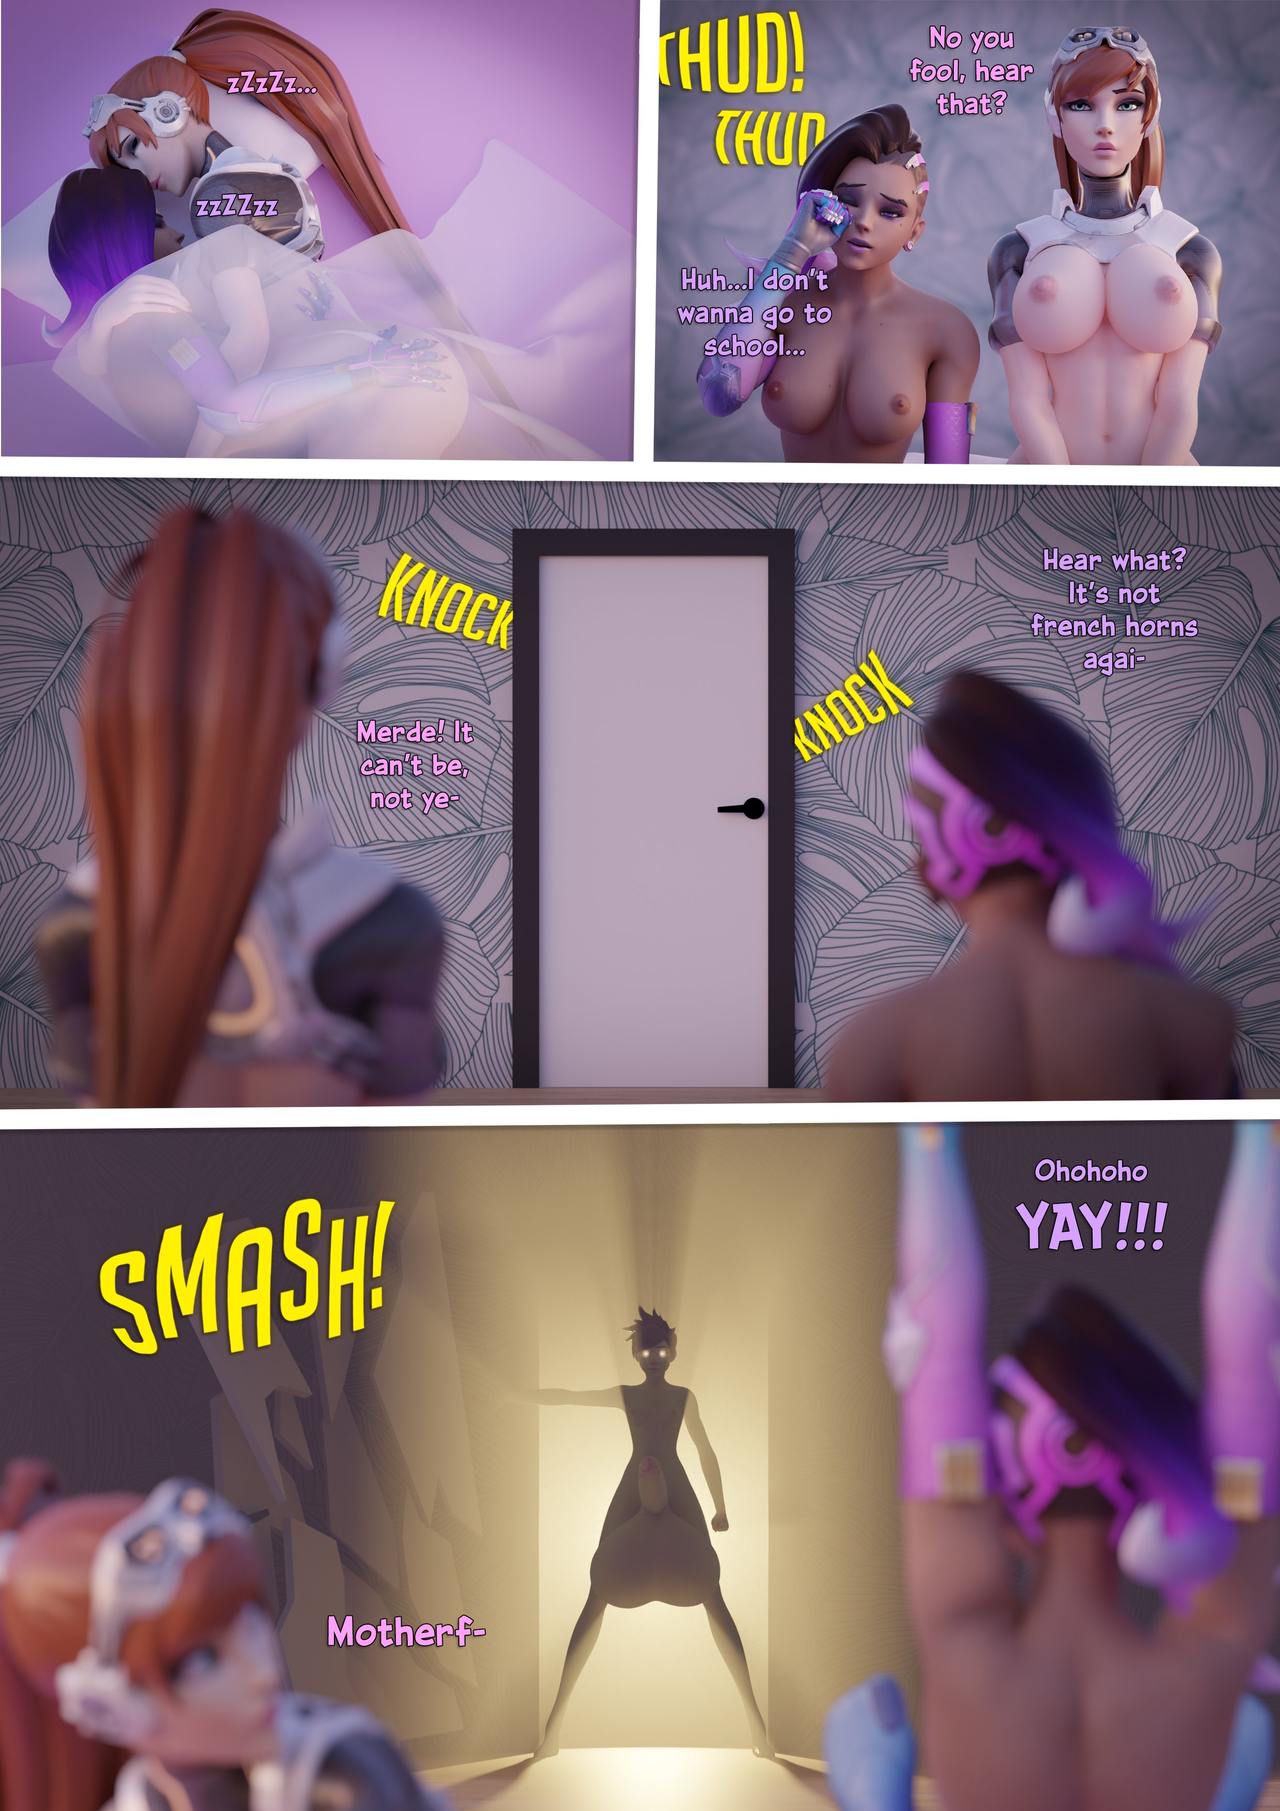 [Chainsmok3r] Tracer's No Nut November (Ongoing) 33